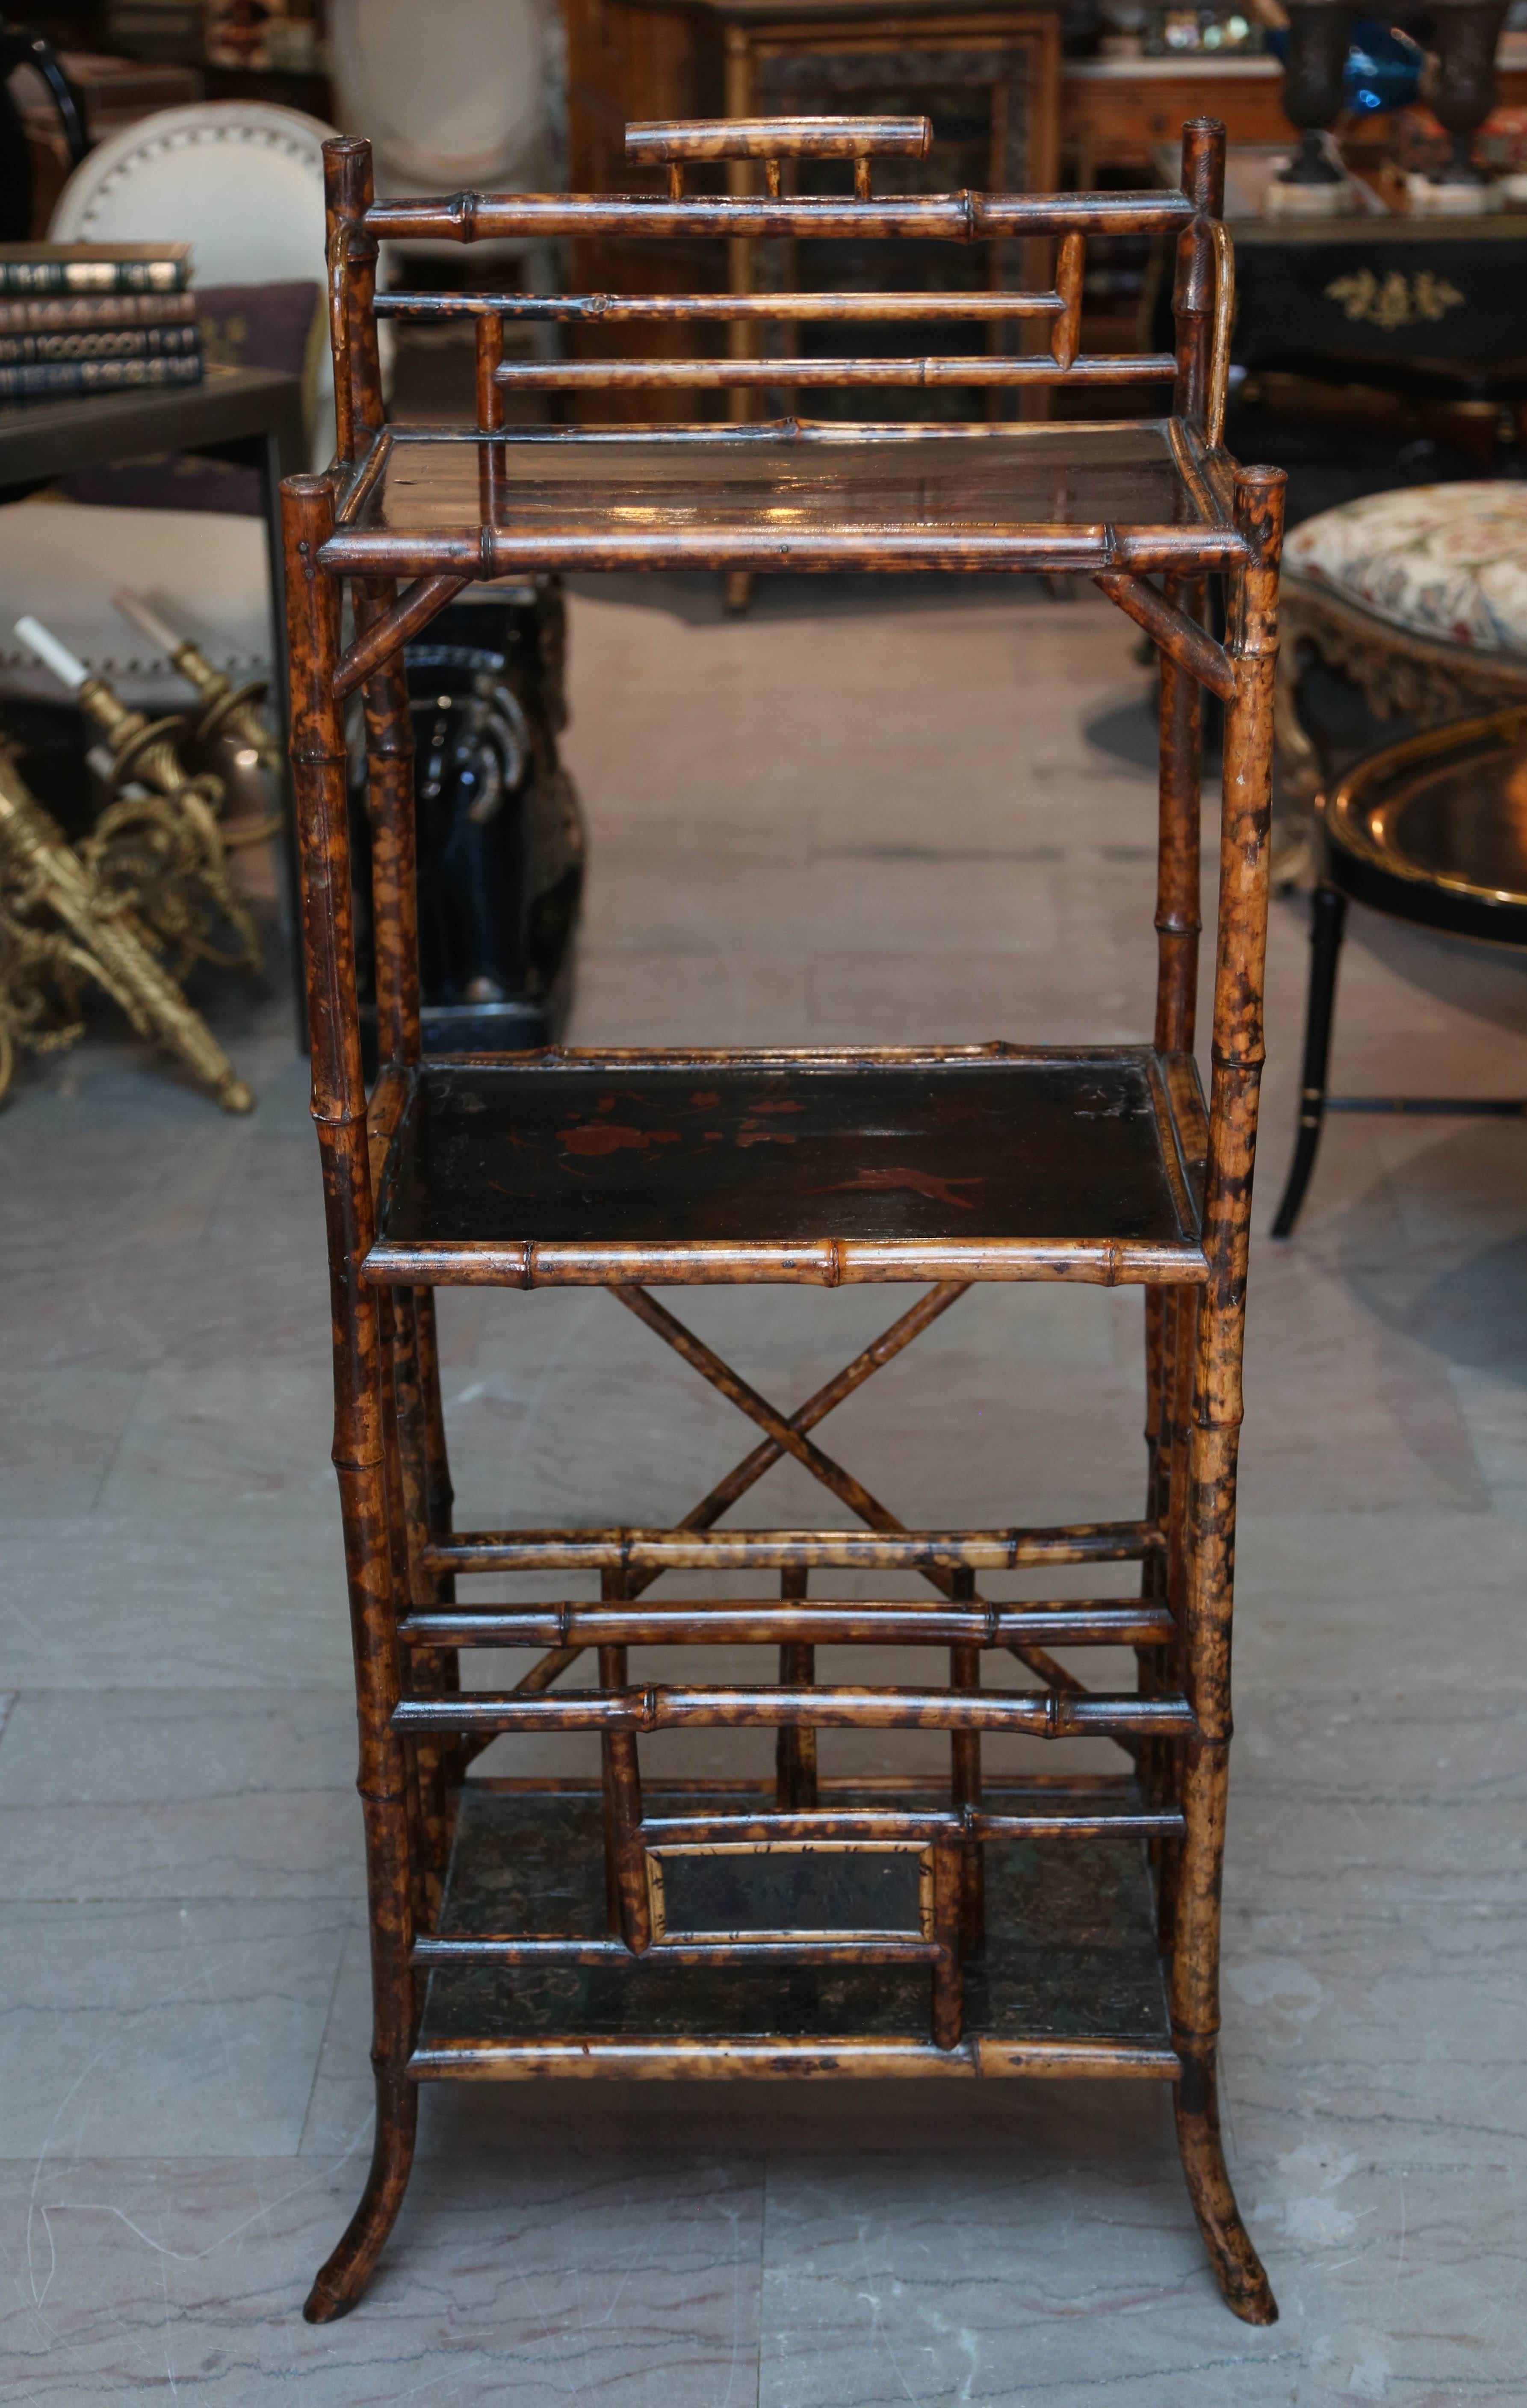 Chinoiserie lacquered details with this unusual multipurpose piece.
It is a graceful and tall shelving unit.